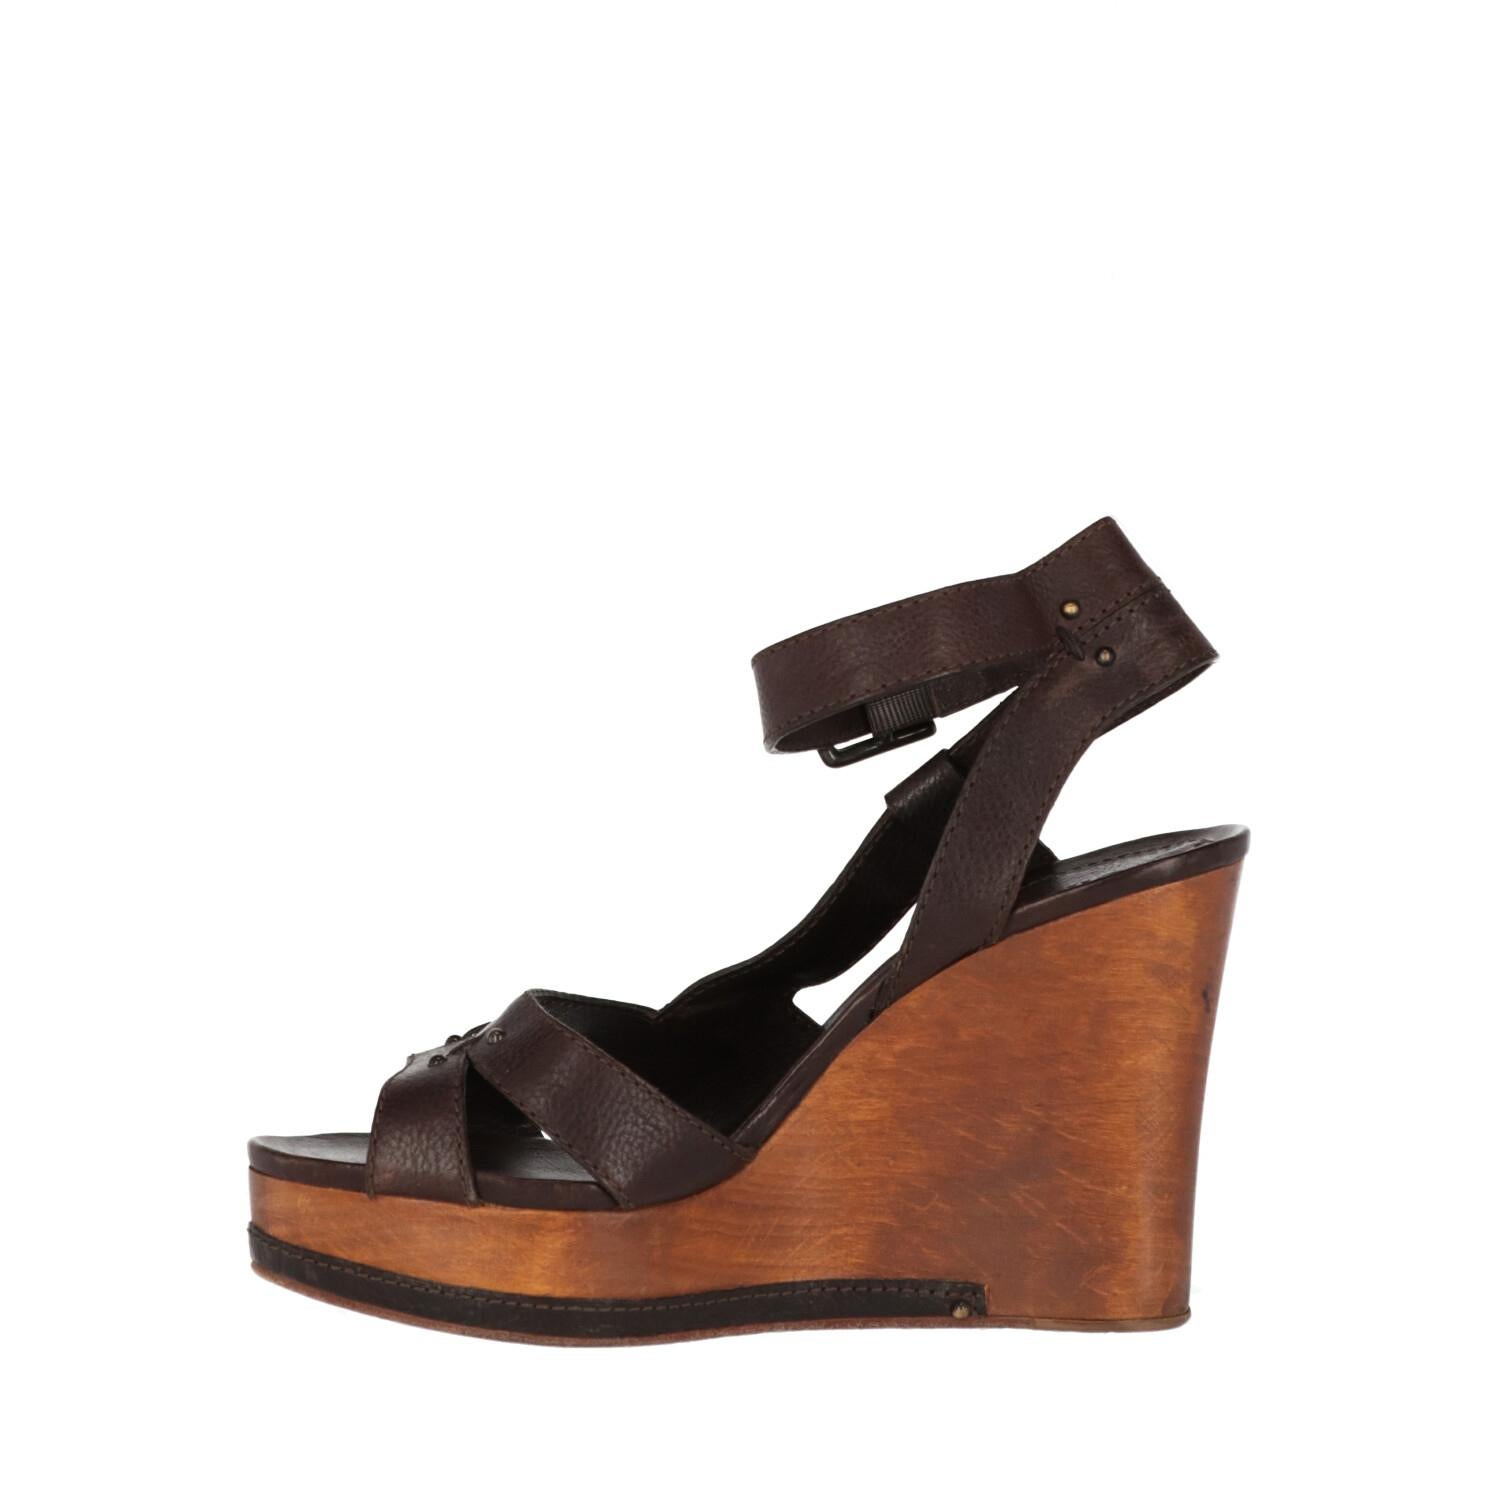 Chloé brown leather high sandals with metal ankle strap and wooden wedge.

The product has some signs of wear, as shown in the pictures.
Years: 2000s

Made in Italy

Size: 39 EU

Heel height: 10,5 cm
Insole: 25 cm